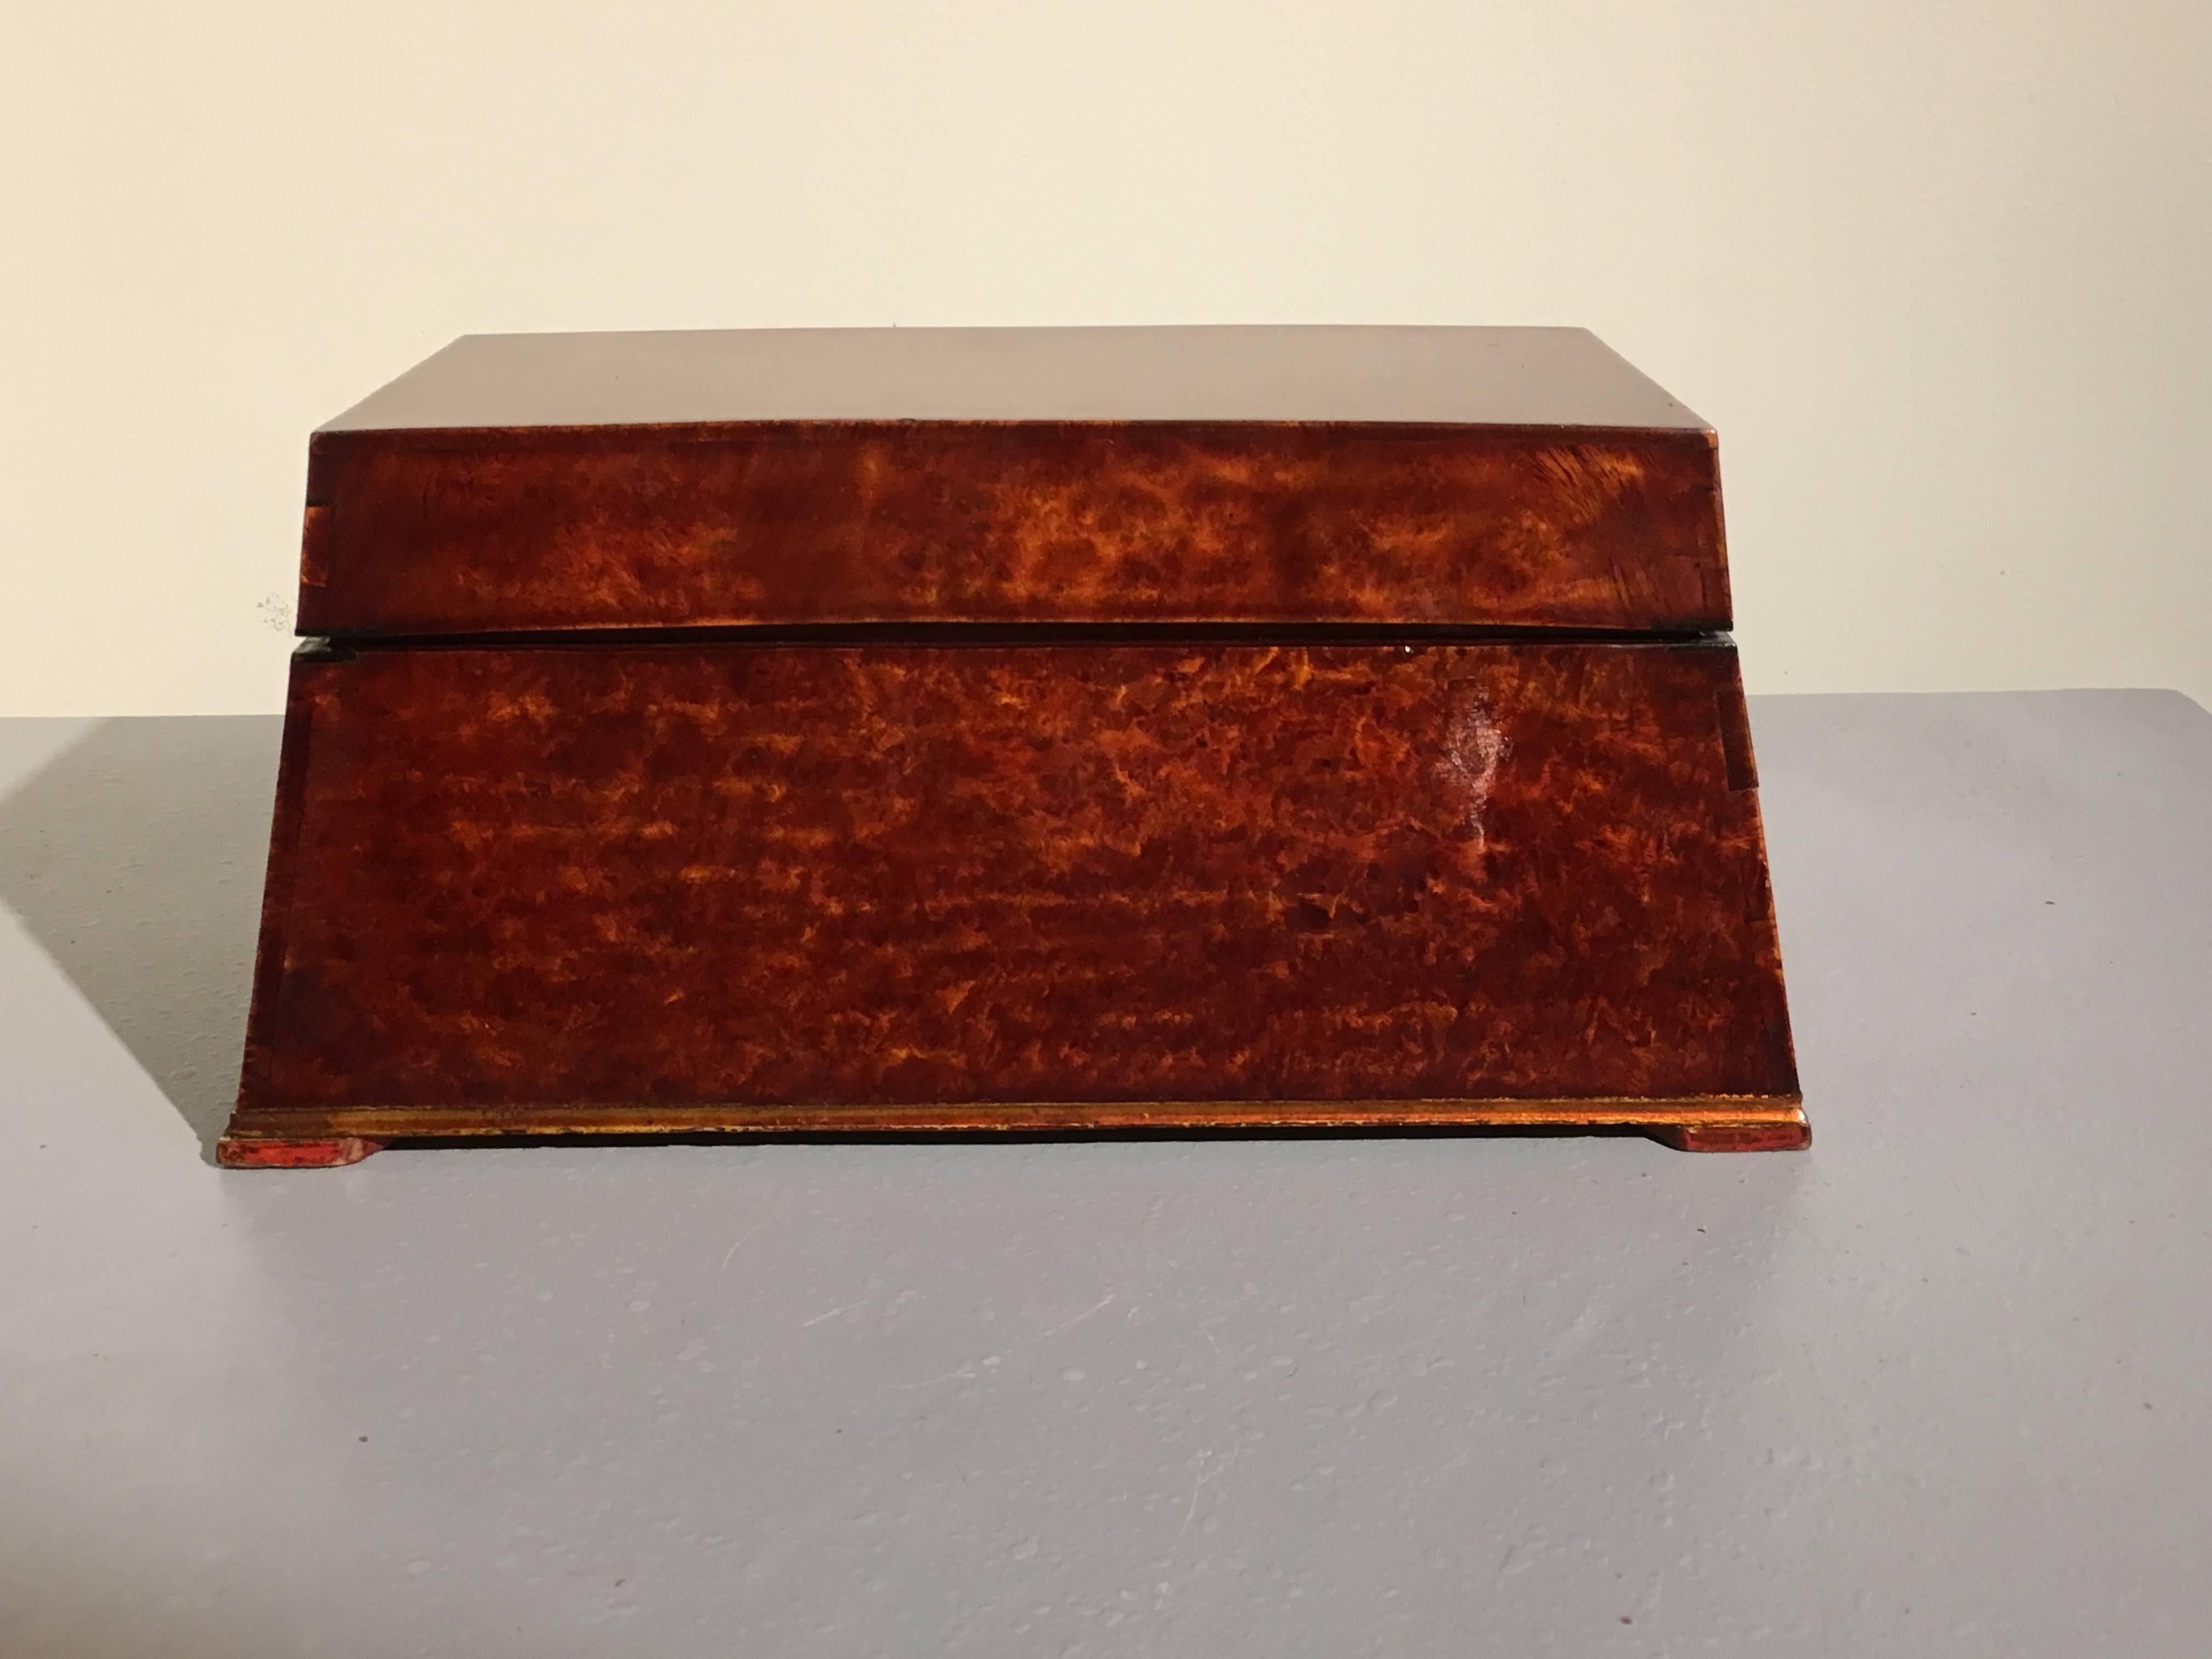 A striking Sumatran lacquered burl humidor box used for the storing implements related to betel nut chewing. The box, bearing a strong Art Deco feel (though predating it by several decades), is of trapezoidal shape and crafted of beautifully figured